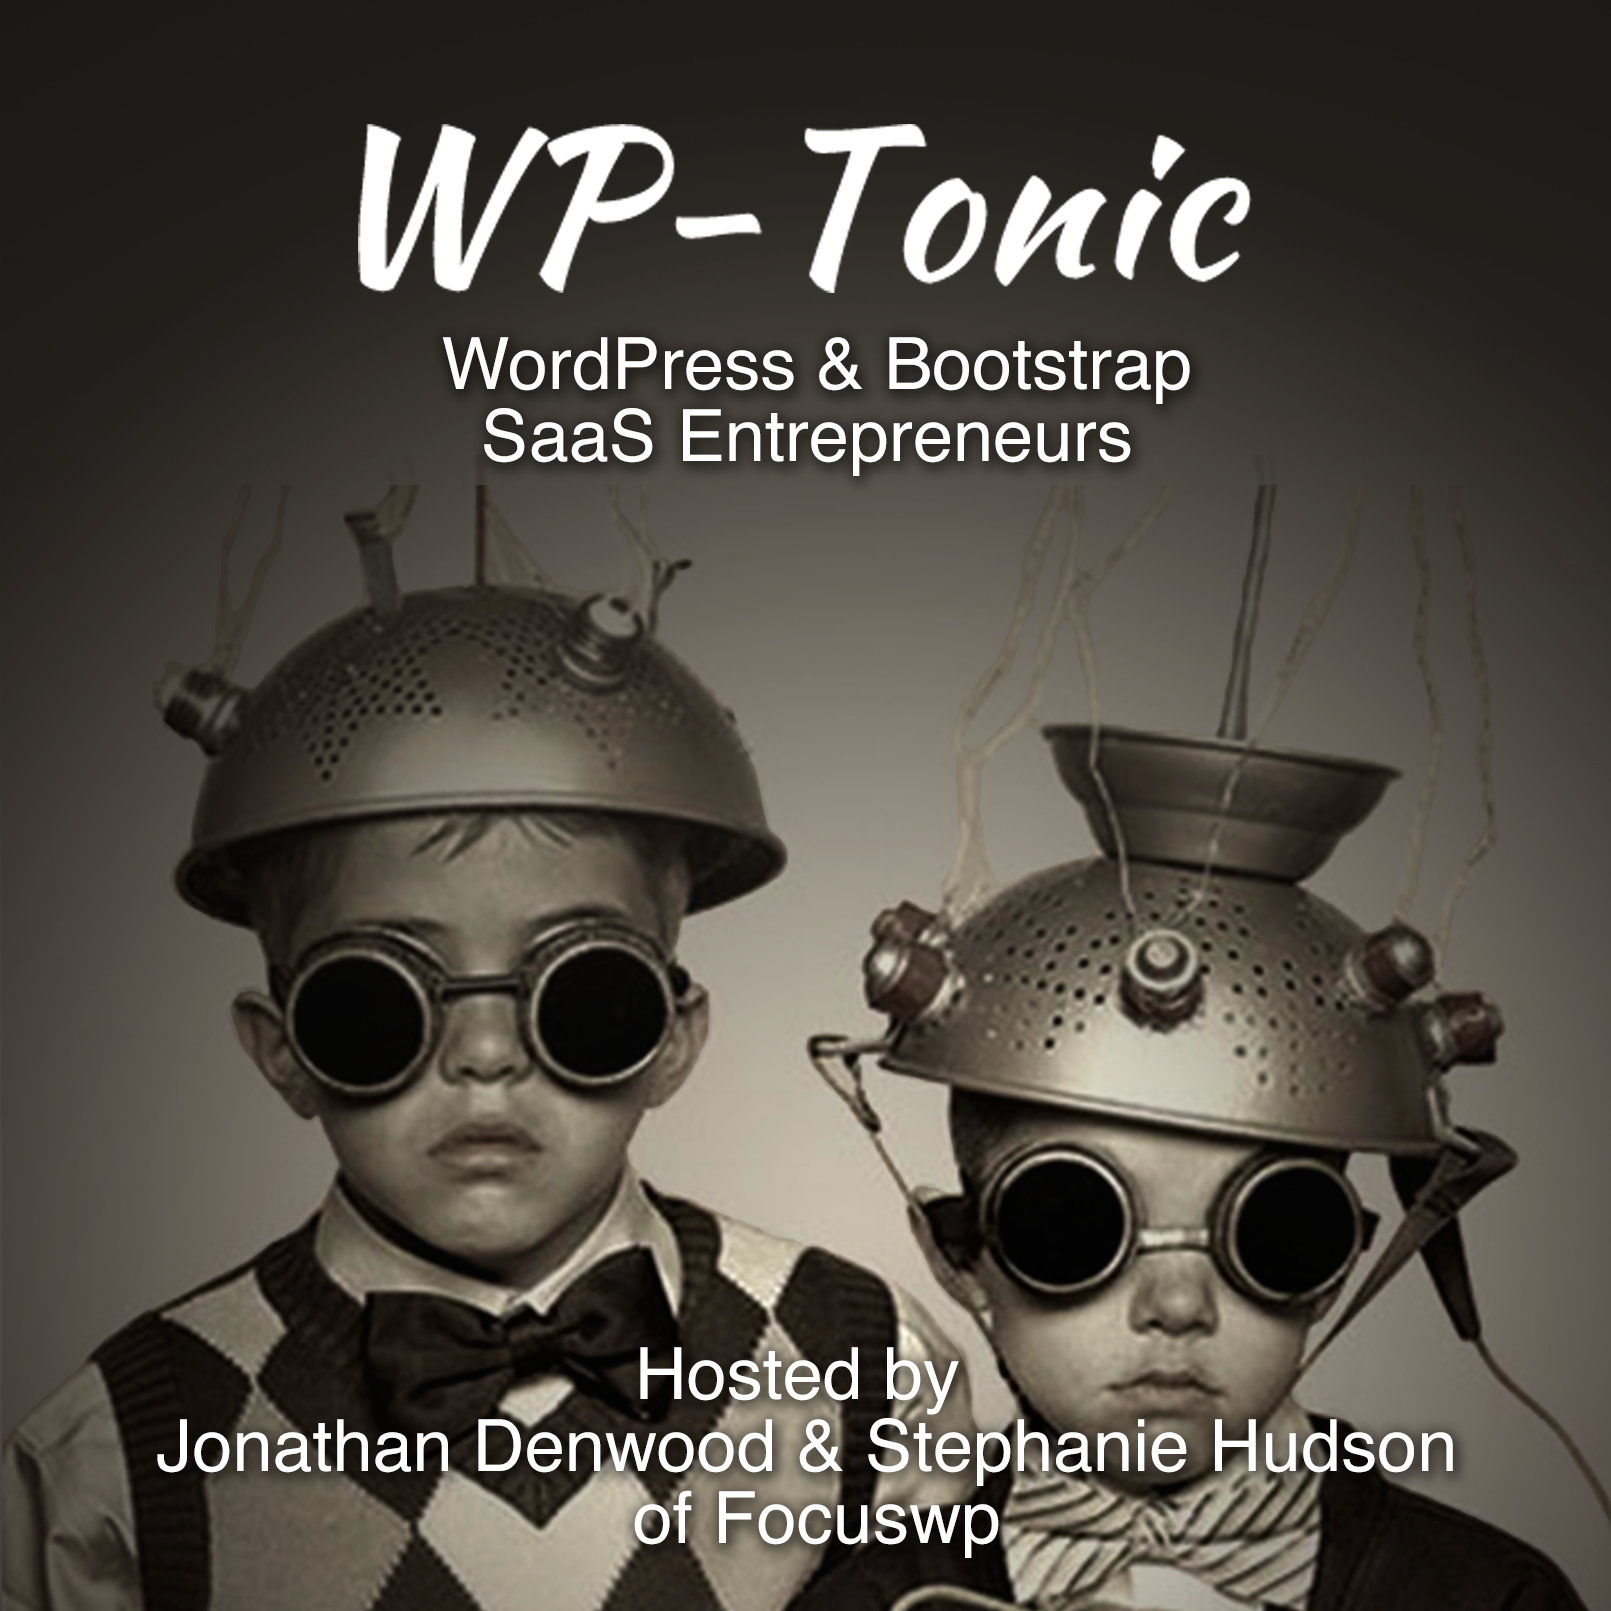 #728 WP-Tonic "This Week In WordPress & Tech" 16th of September, 2022 at 8:30 am PST 